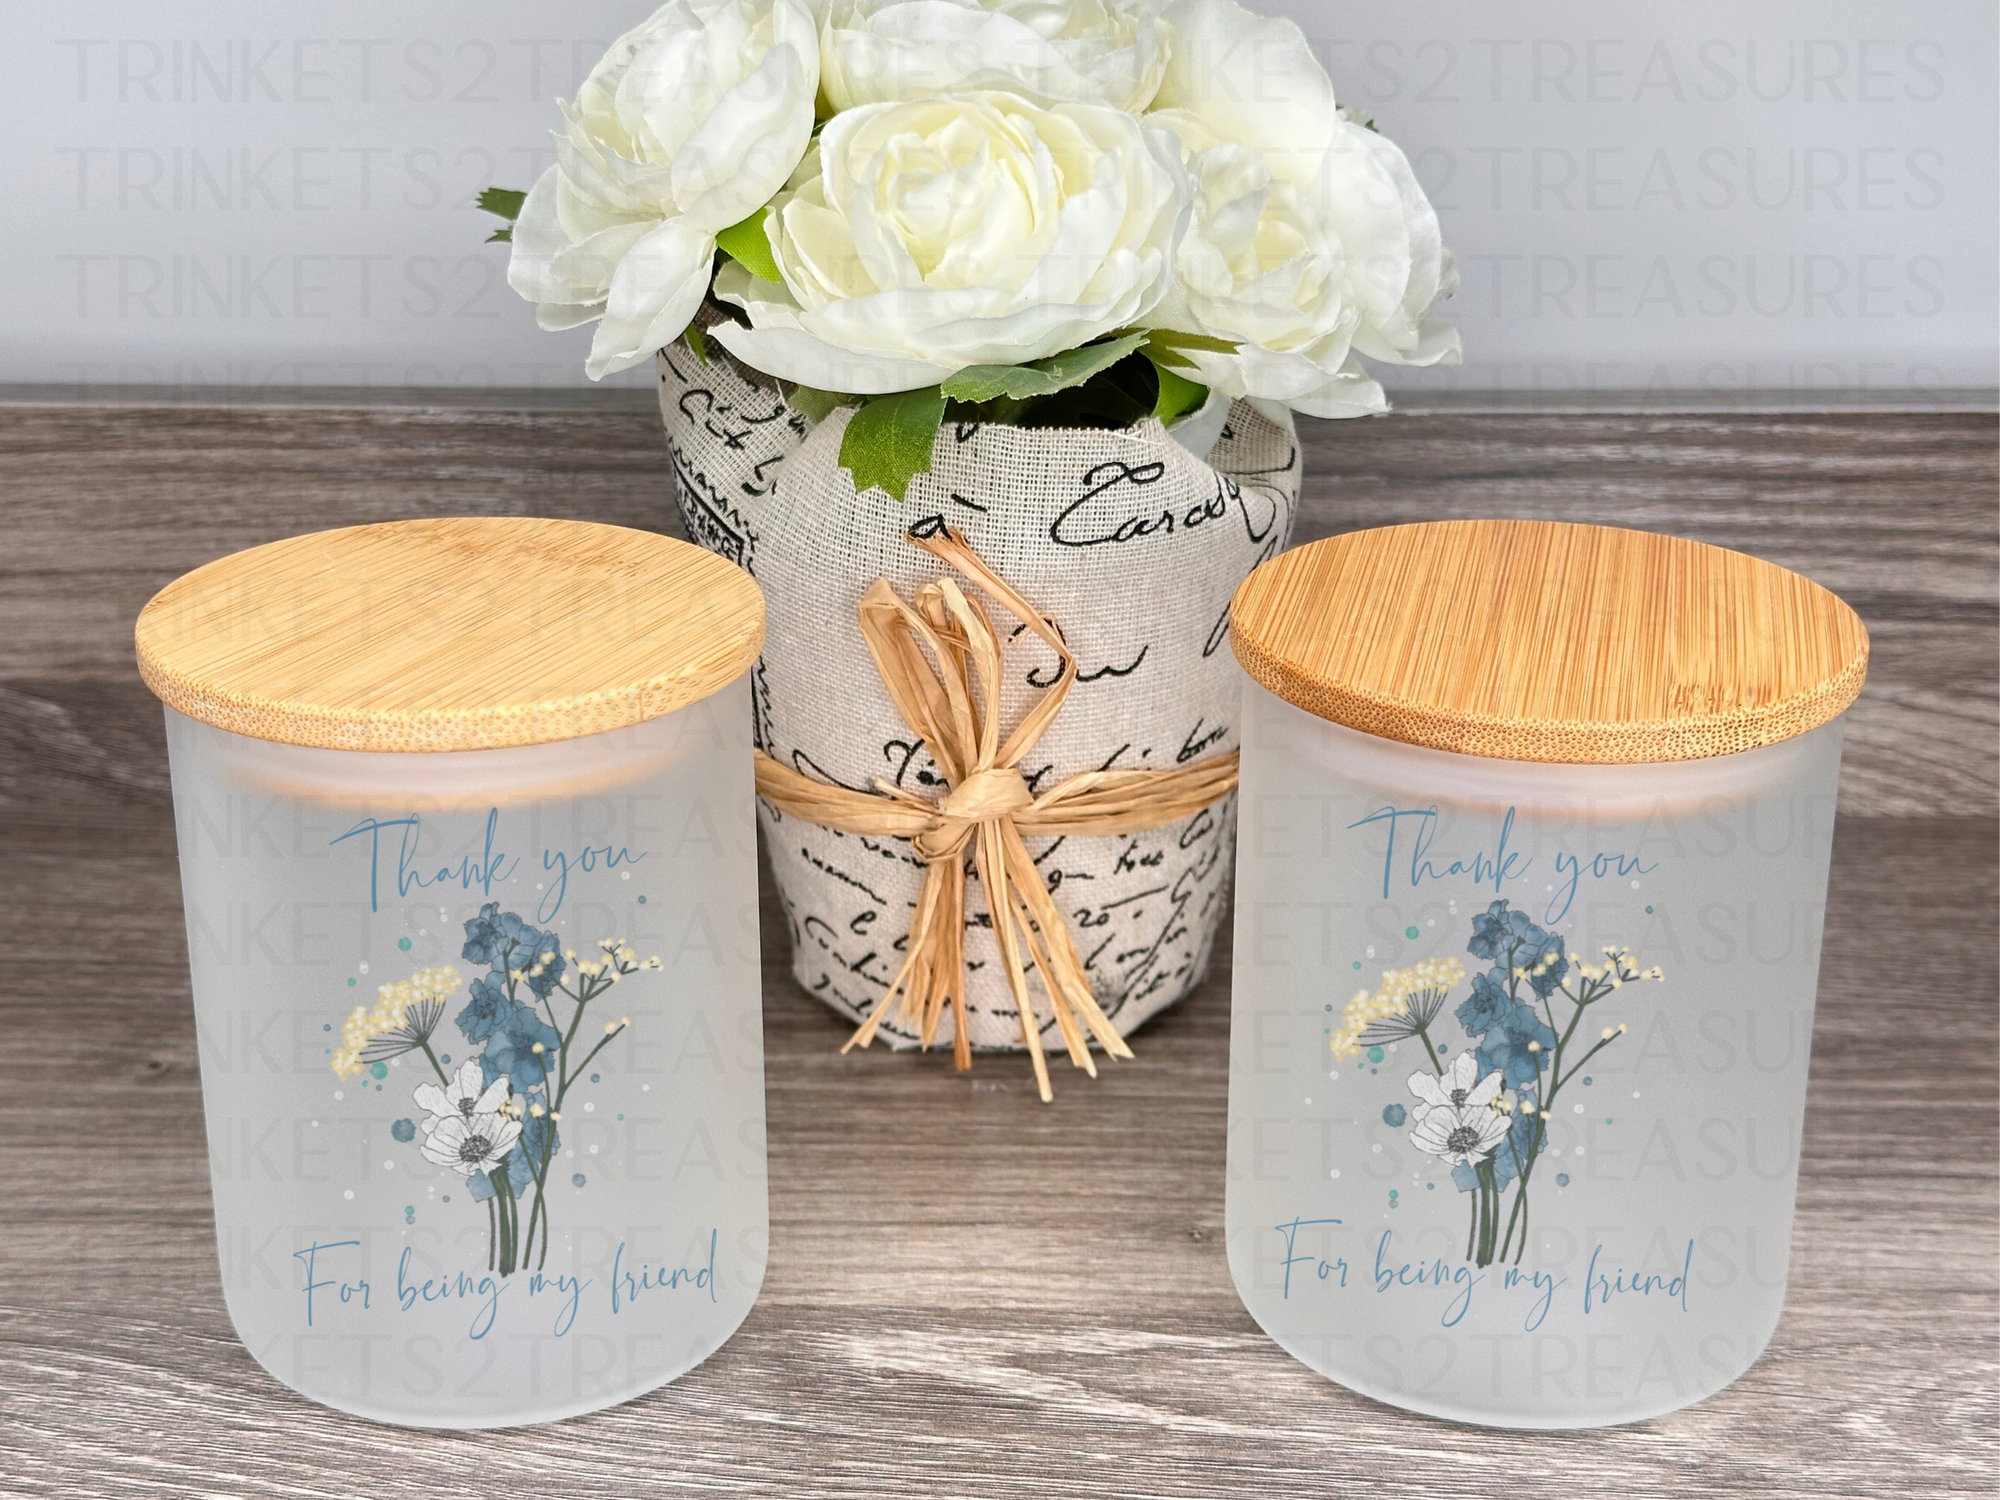 10 oz Frosted Candle Jars with Bamboo Lid/Multi-Purpose Jar/You Make Life Beautiful/#508